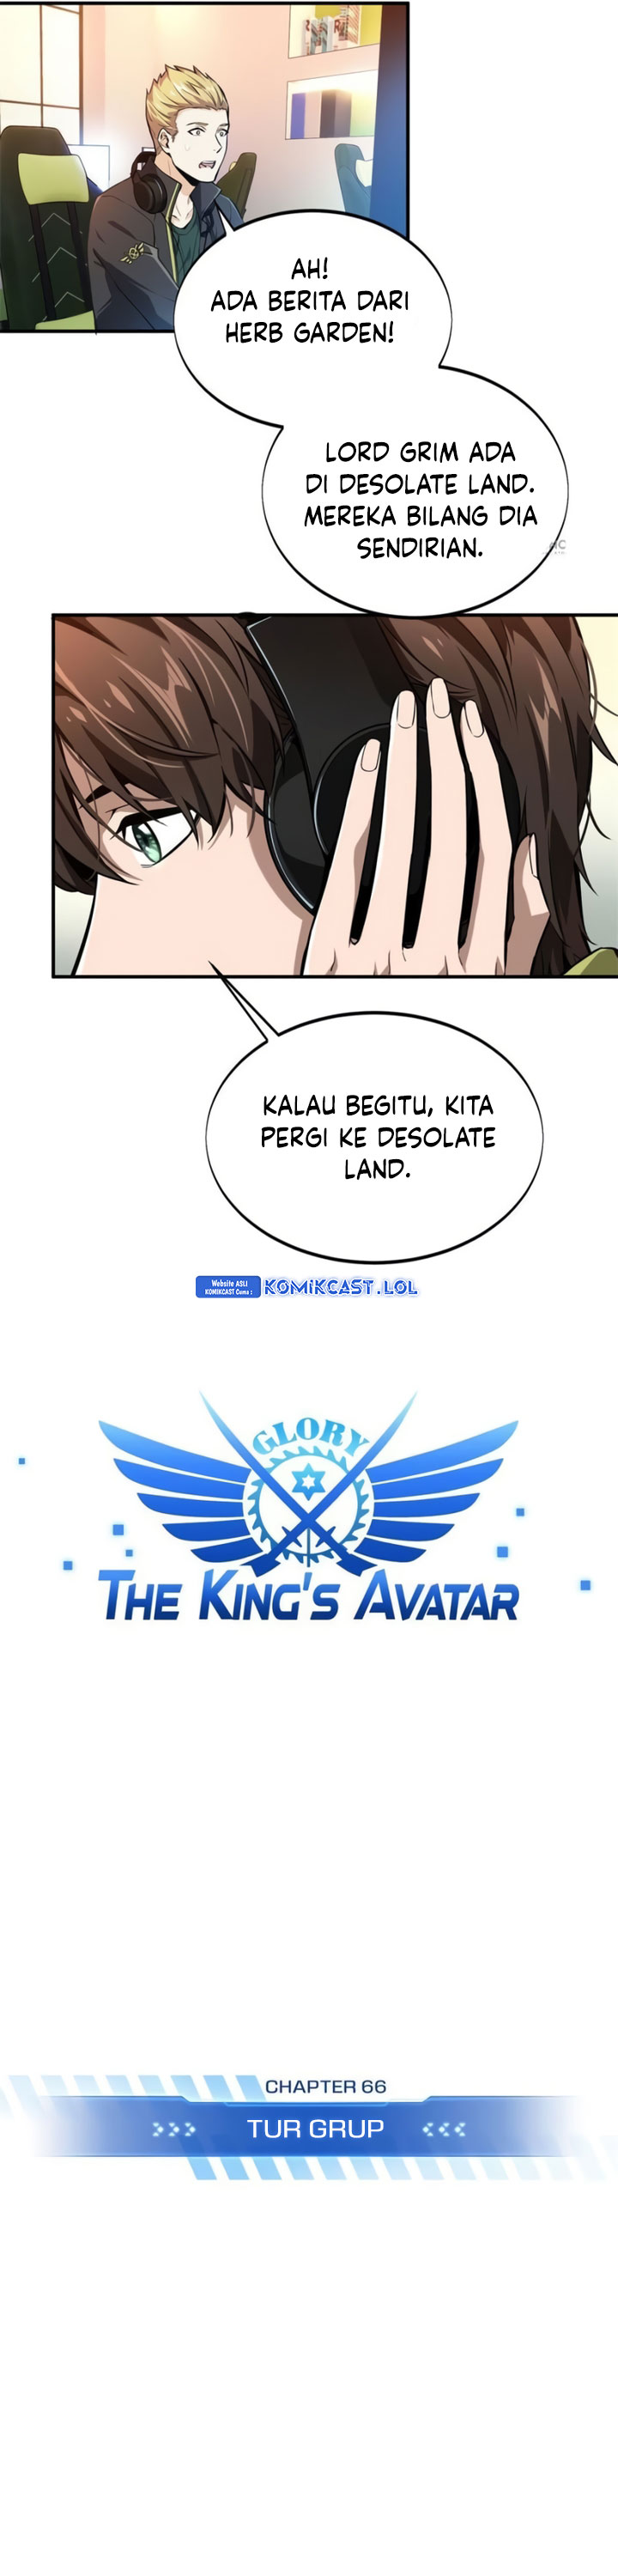 The King’s Avatar (2020) Chapter 66